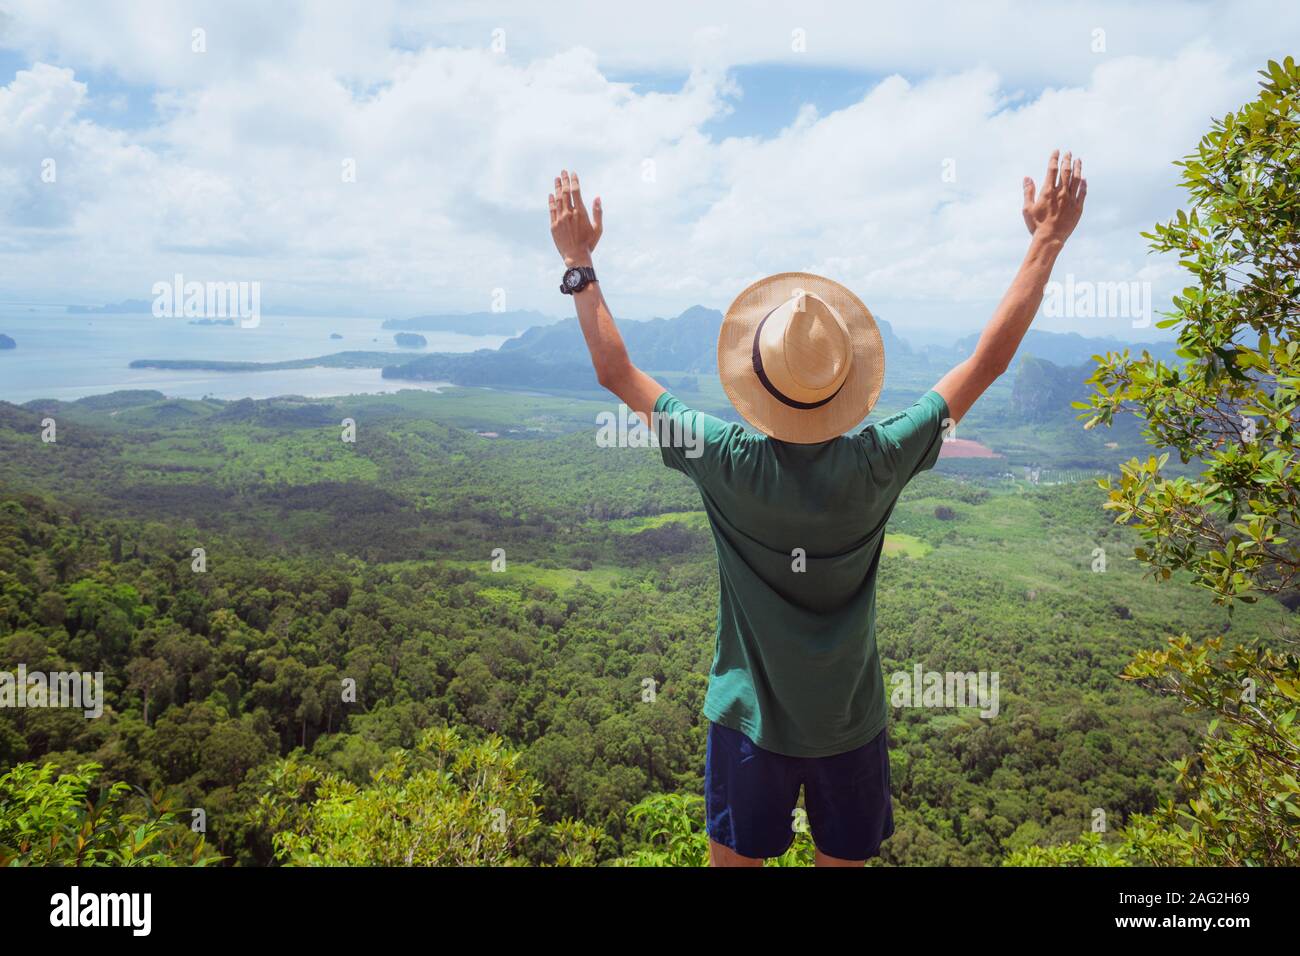 Stock image: a happy traveler with his hands raised up in admiration stands on top of high mountain and watches landscape of forest, hills, and sea. Stock Photo